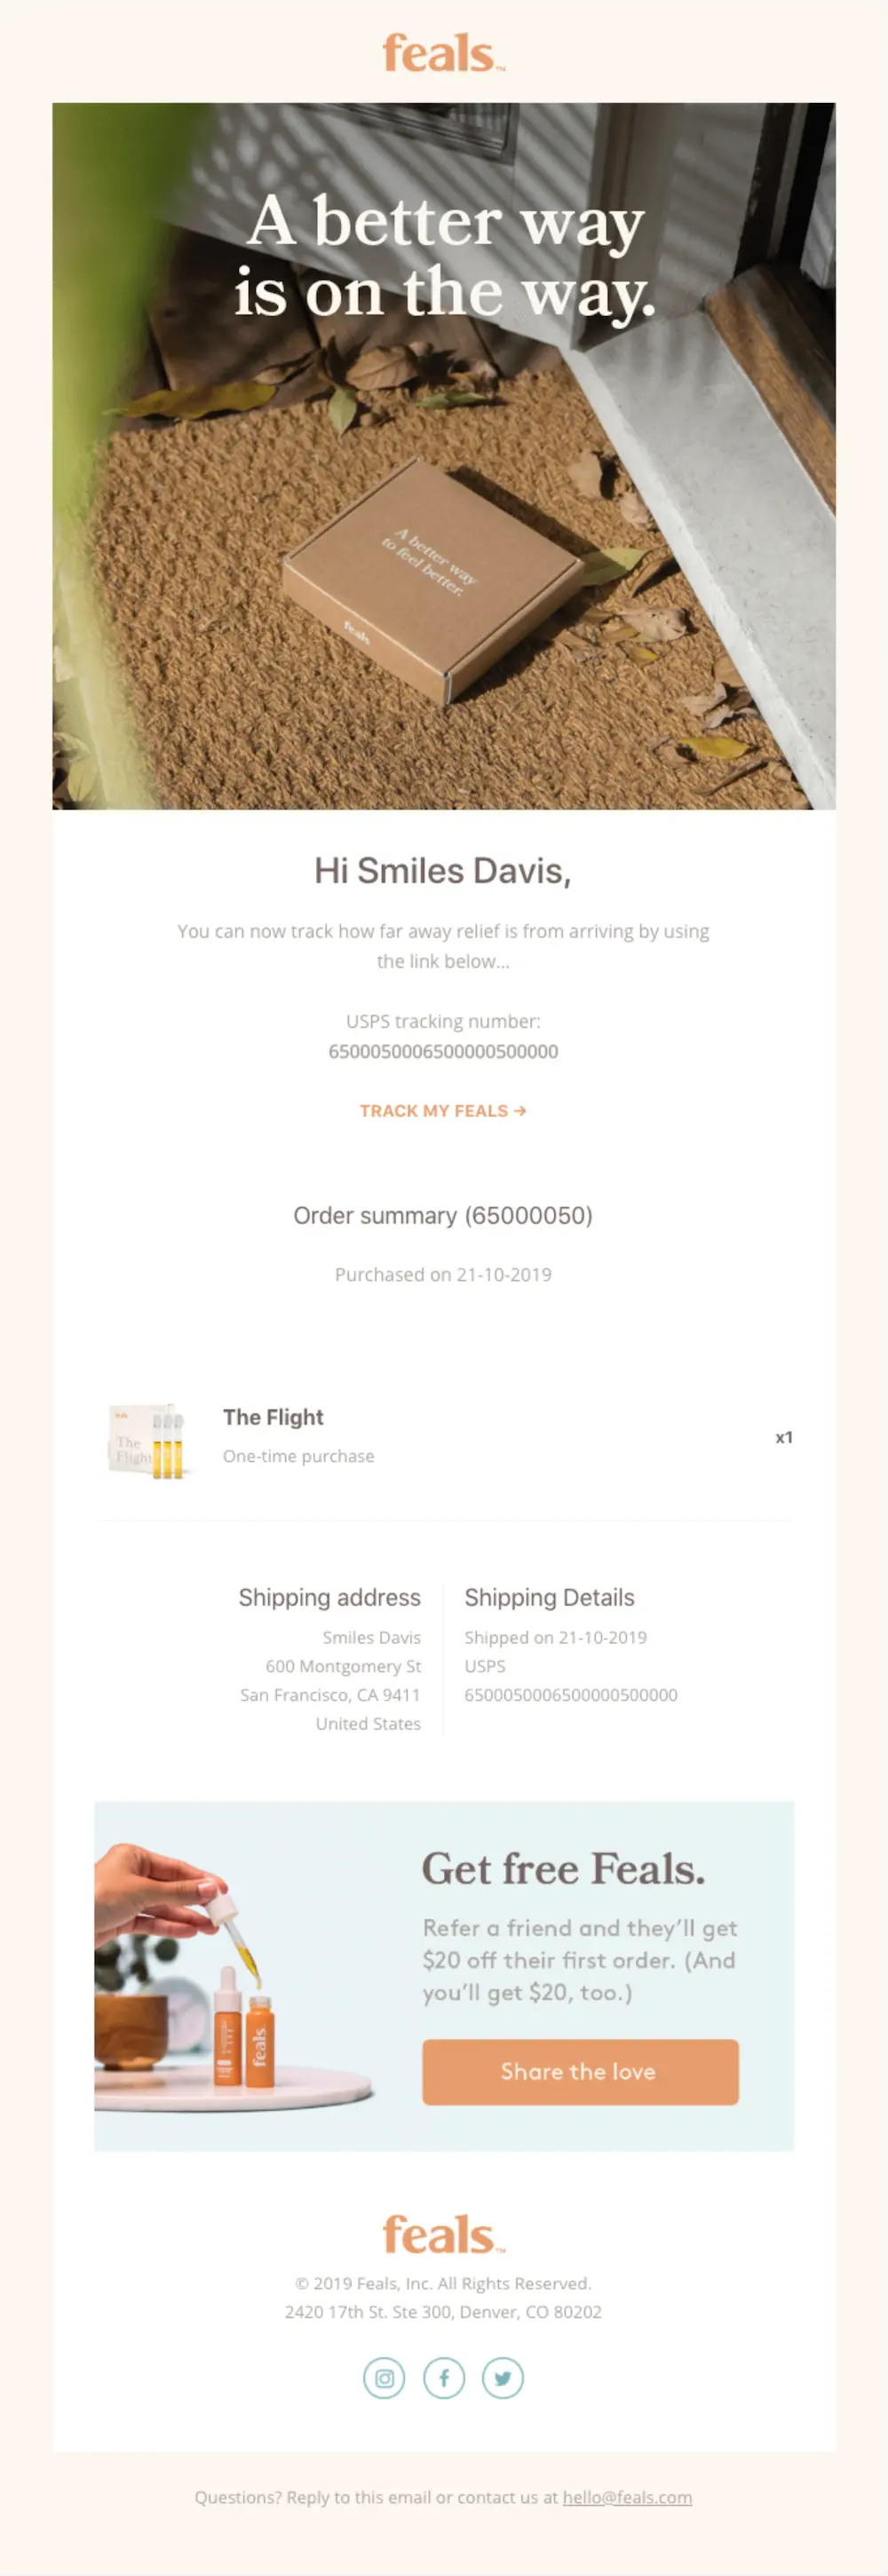 Feals shipping confirmation email says "A better way is on the way" and contains regular elements of a shipping email, such as tracking number, order summary, shipping address, and details, Feals also offers an $20 off incentive for customers who refer a friend